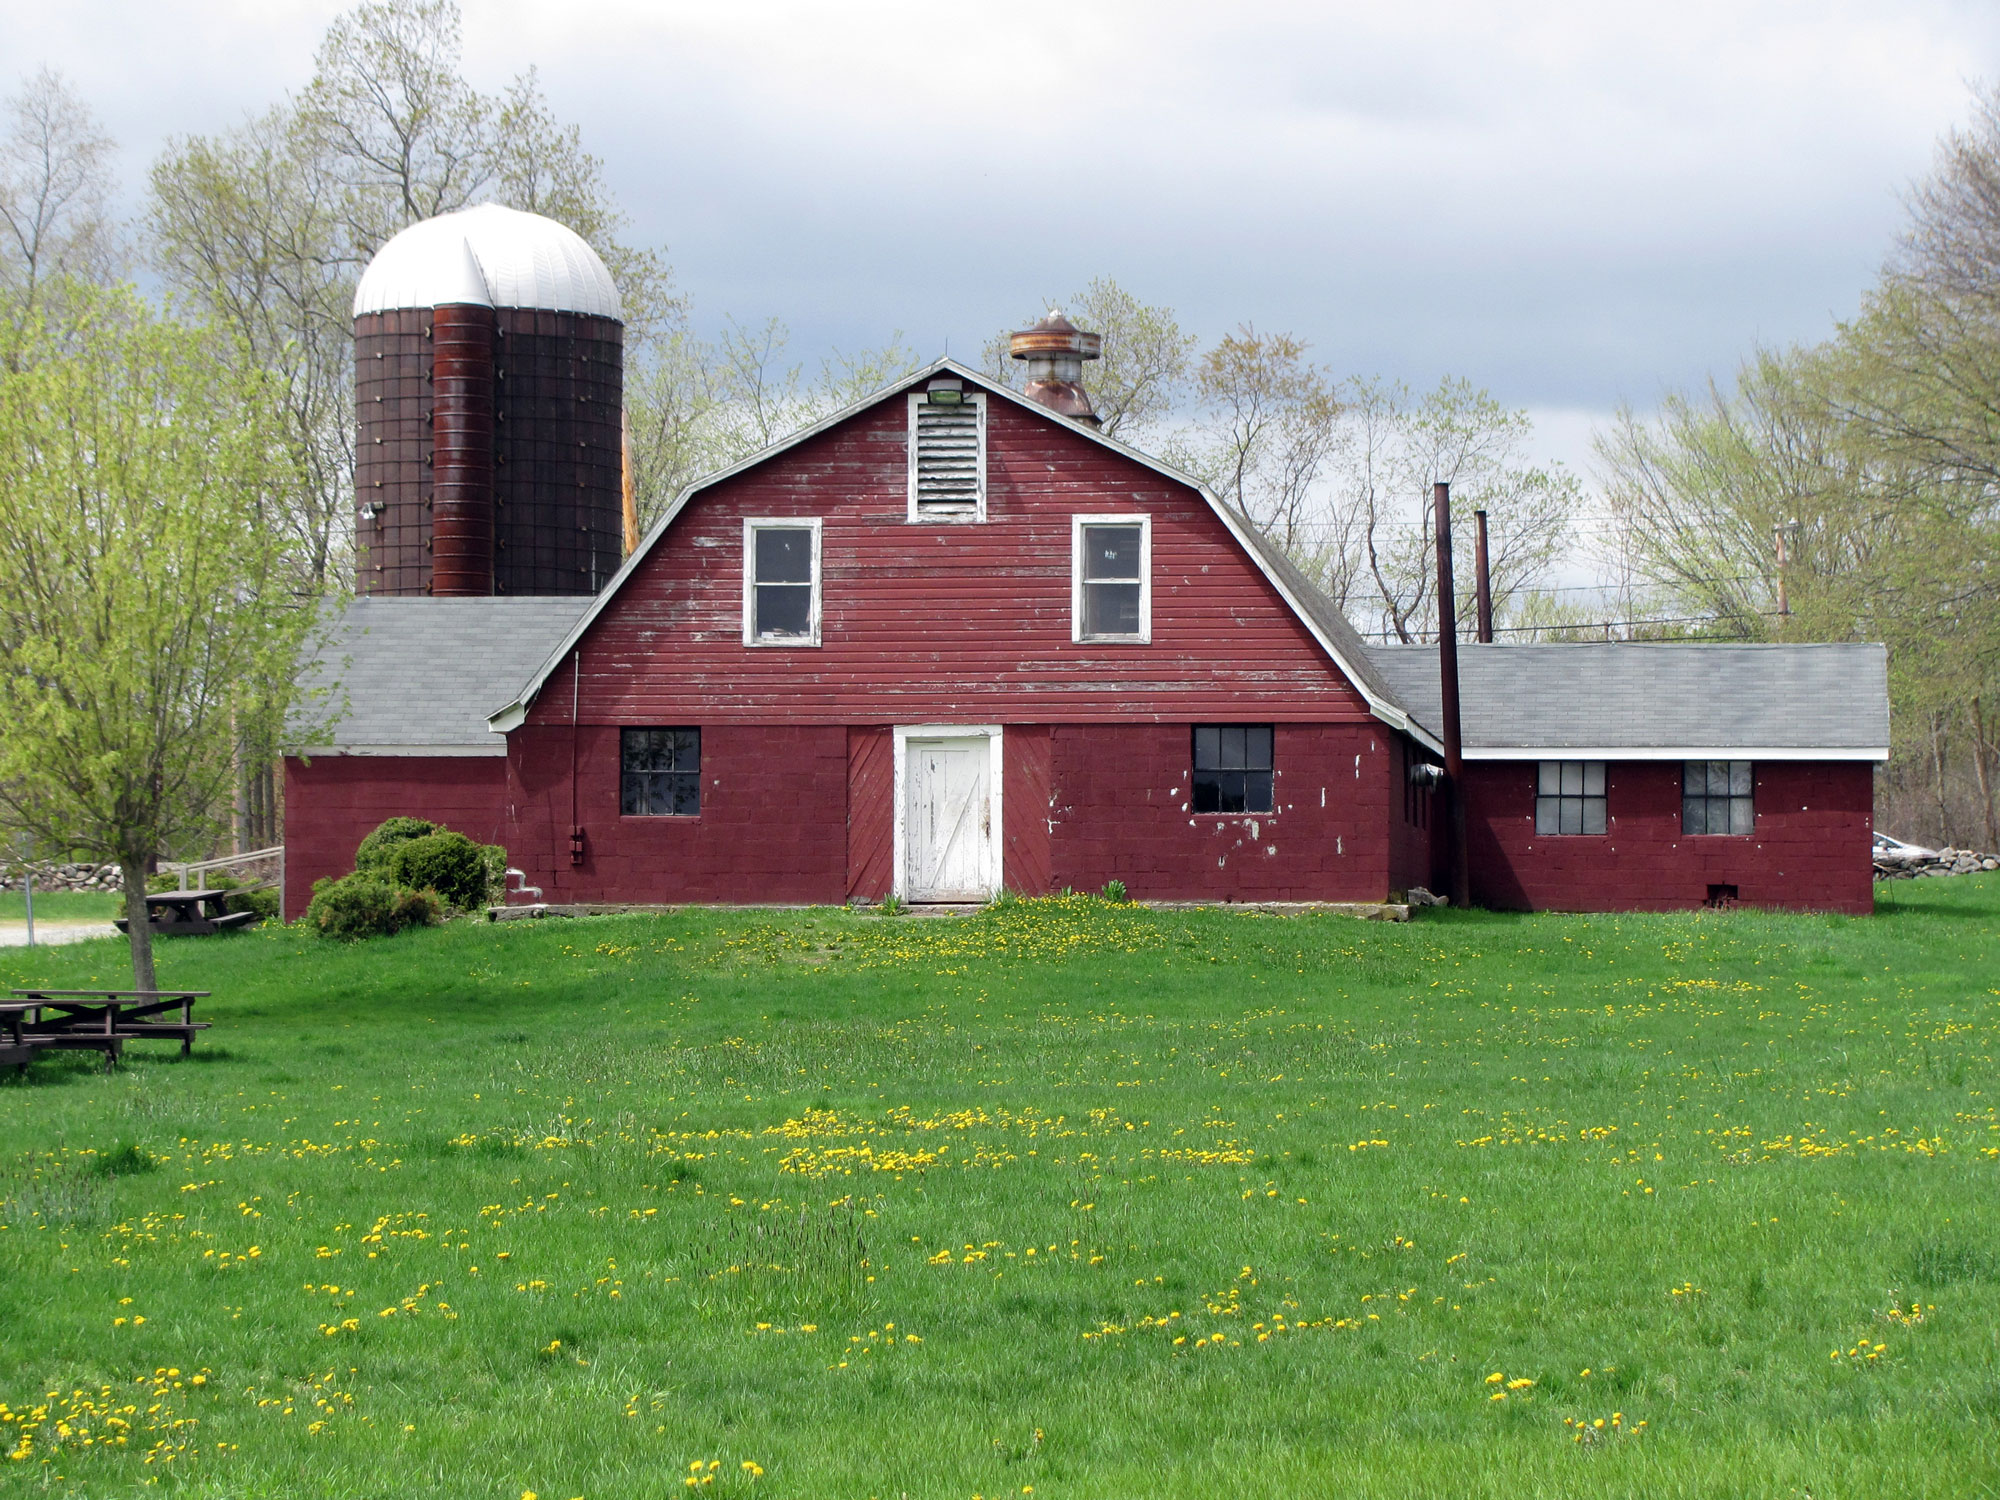 A rustic red barn on a New England farm in spring